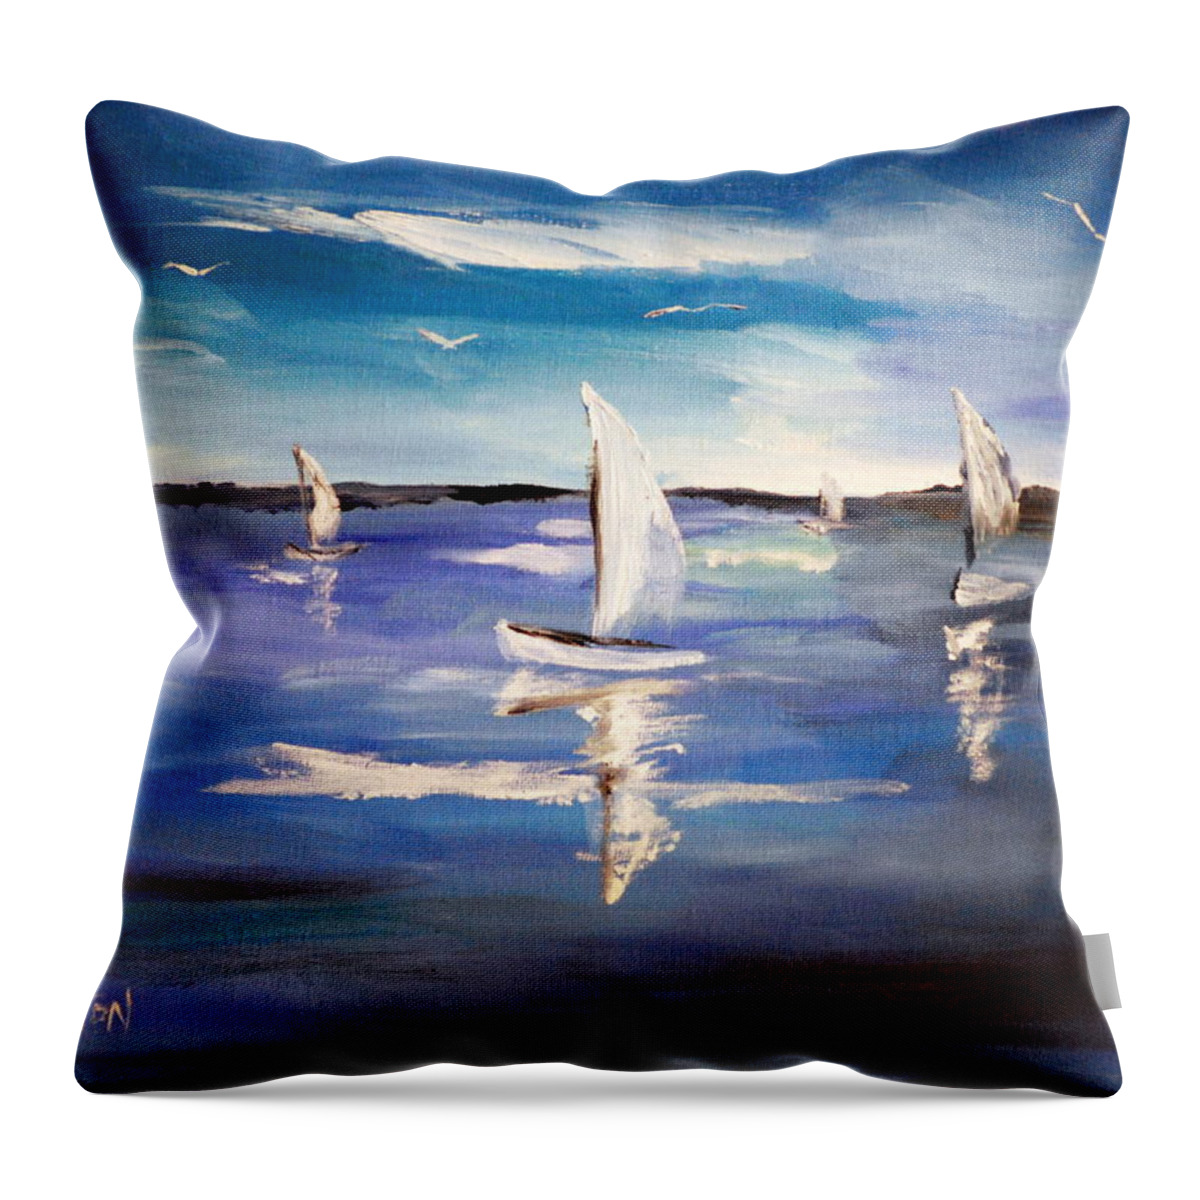 Blue Throw Pillow featuring the painting Blue Sailing by Phil Burton